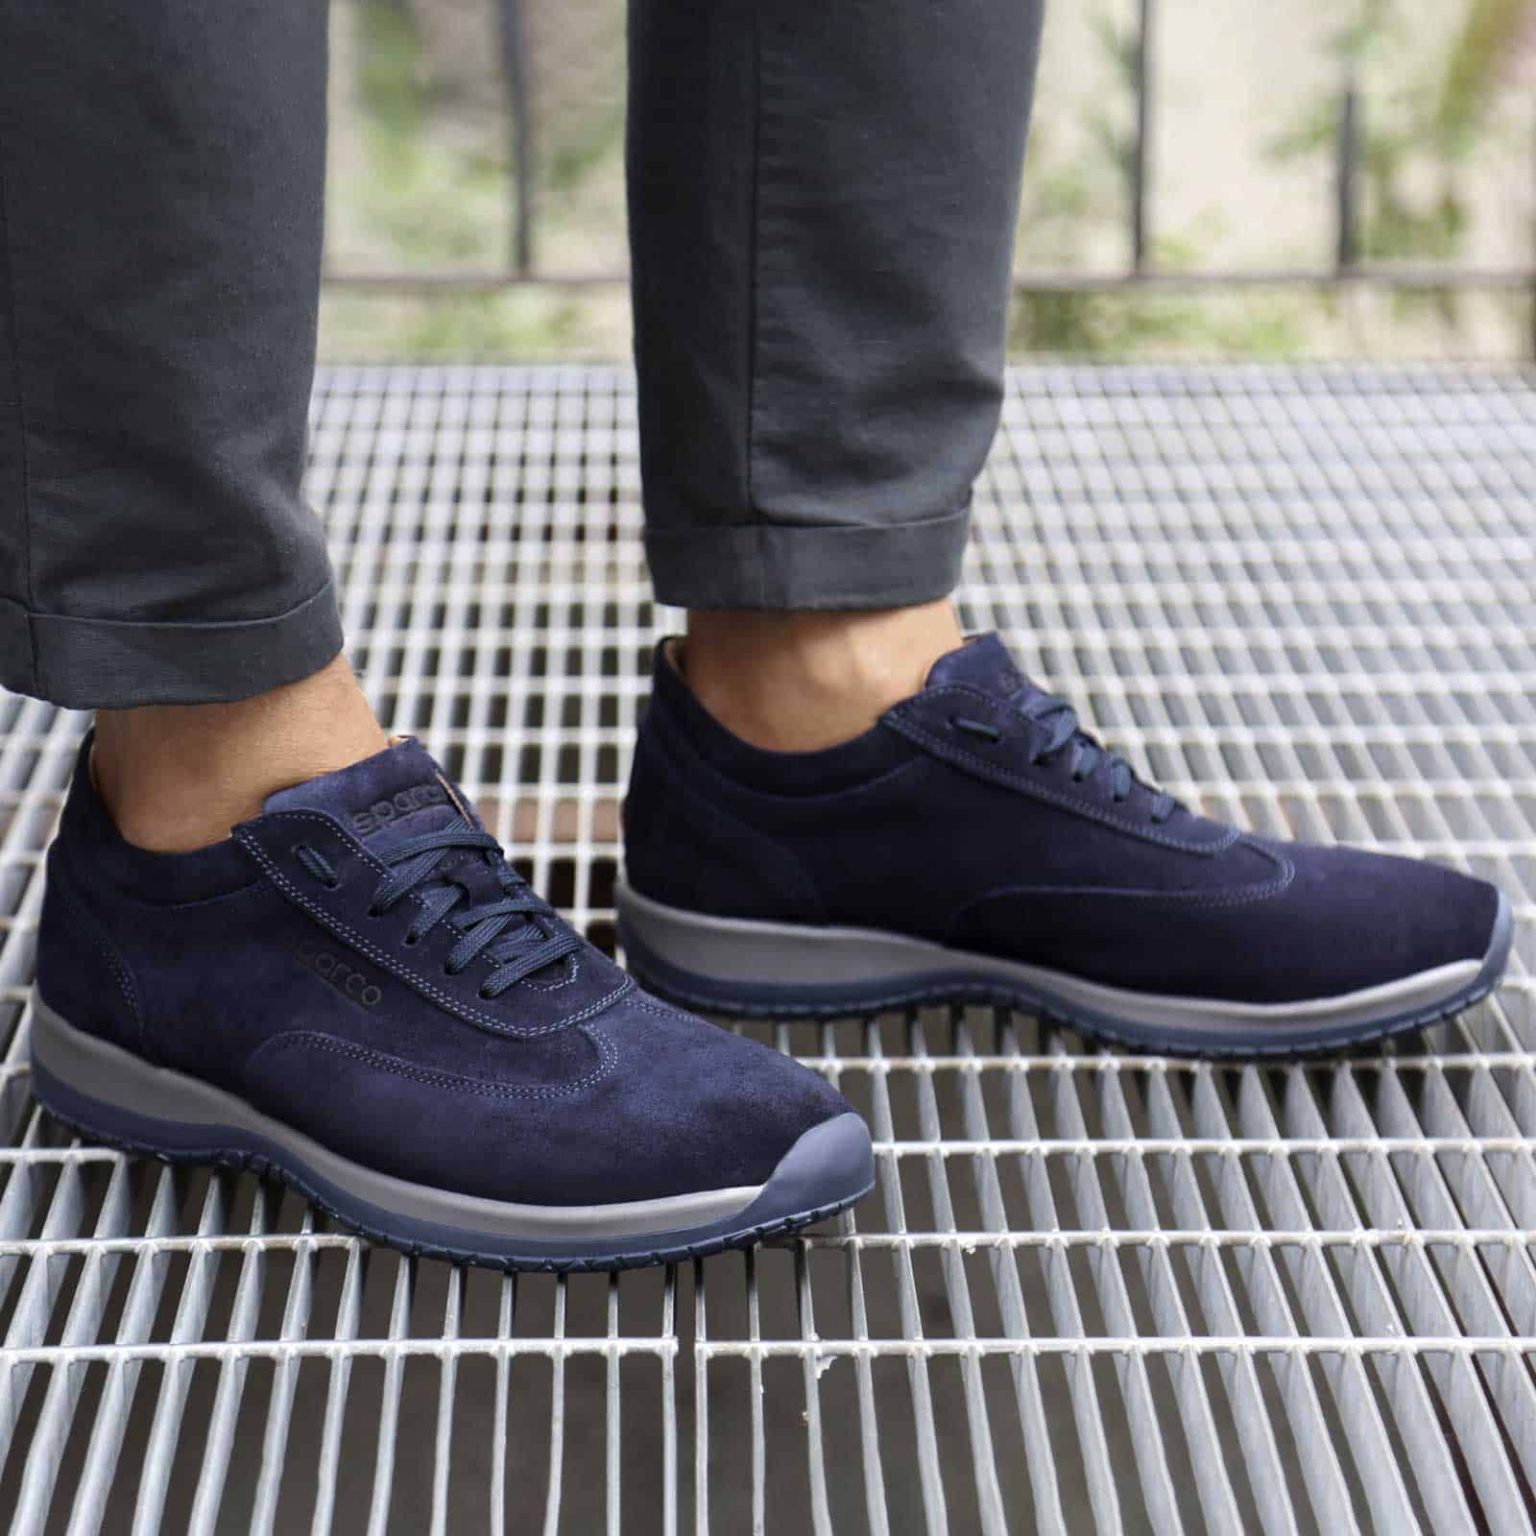 Sparco Imola-GP1 Blue Shoes Sneakers in Suede » Sparco Fashion AU|NZ